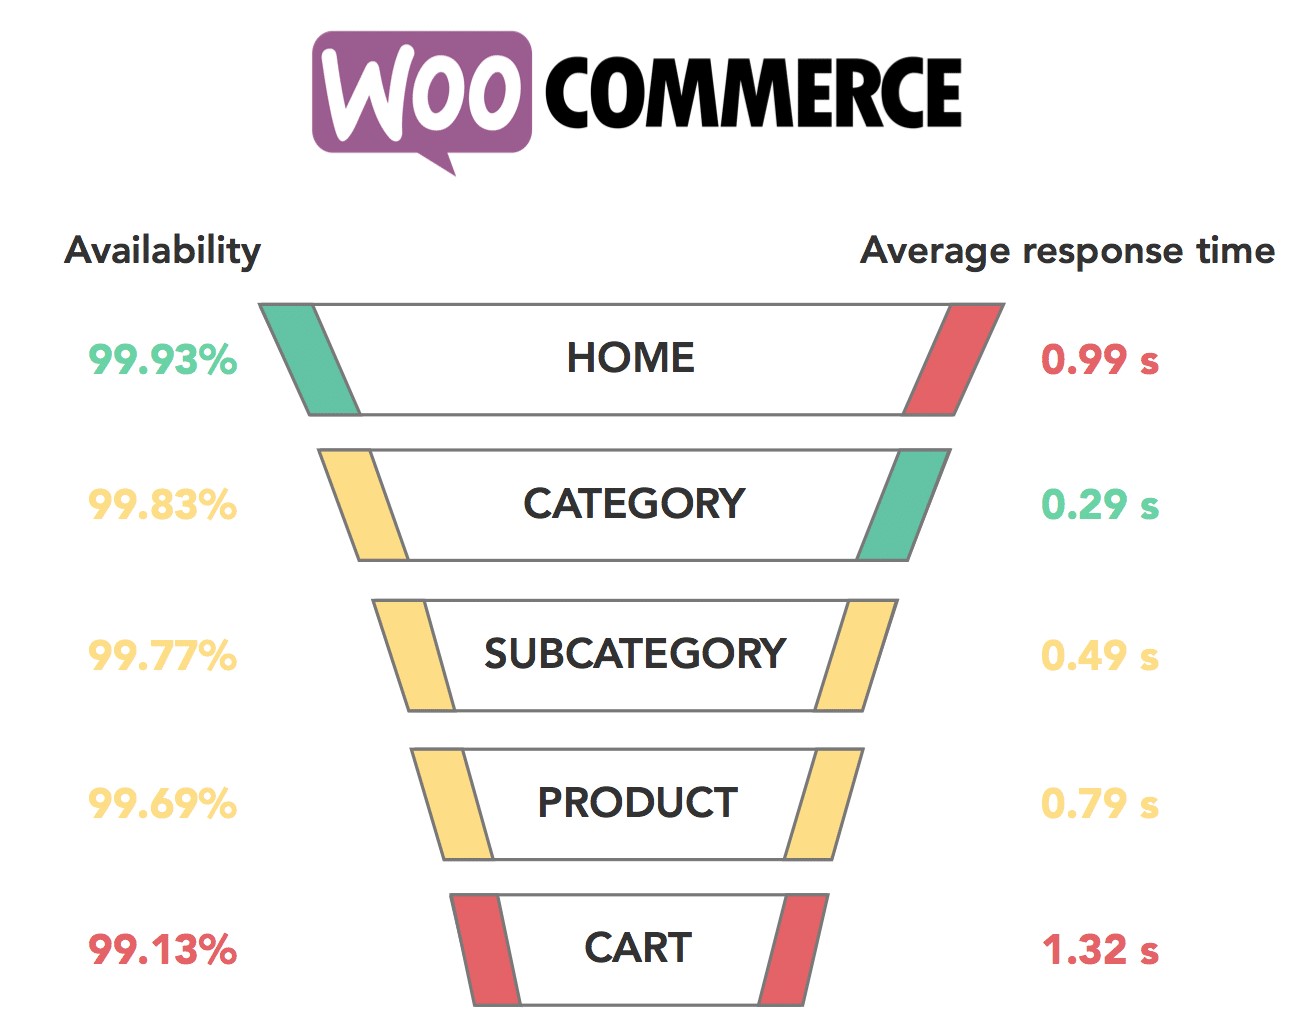 Response time specifications of WooCommerce (Source: Quanta)